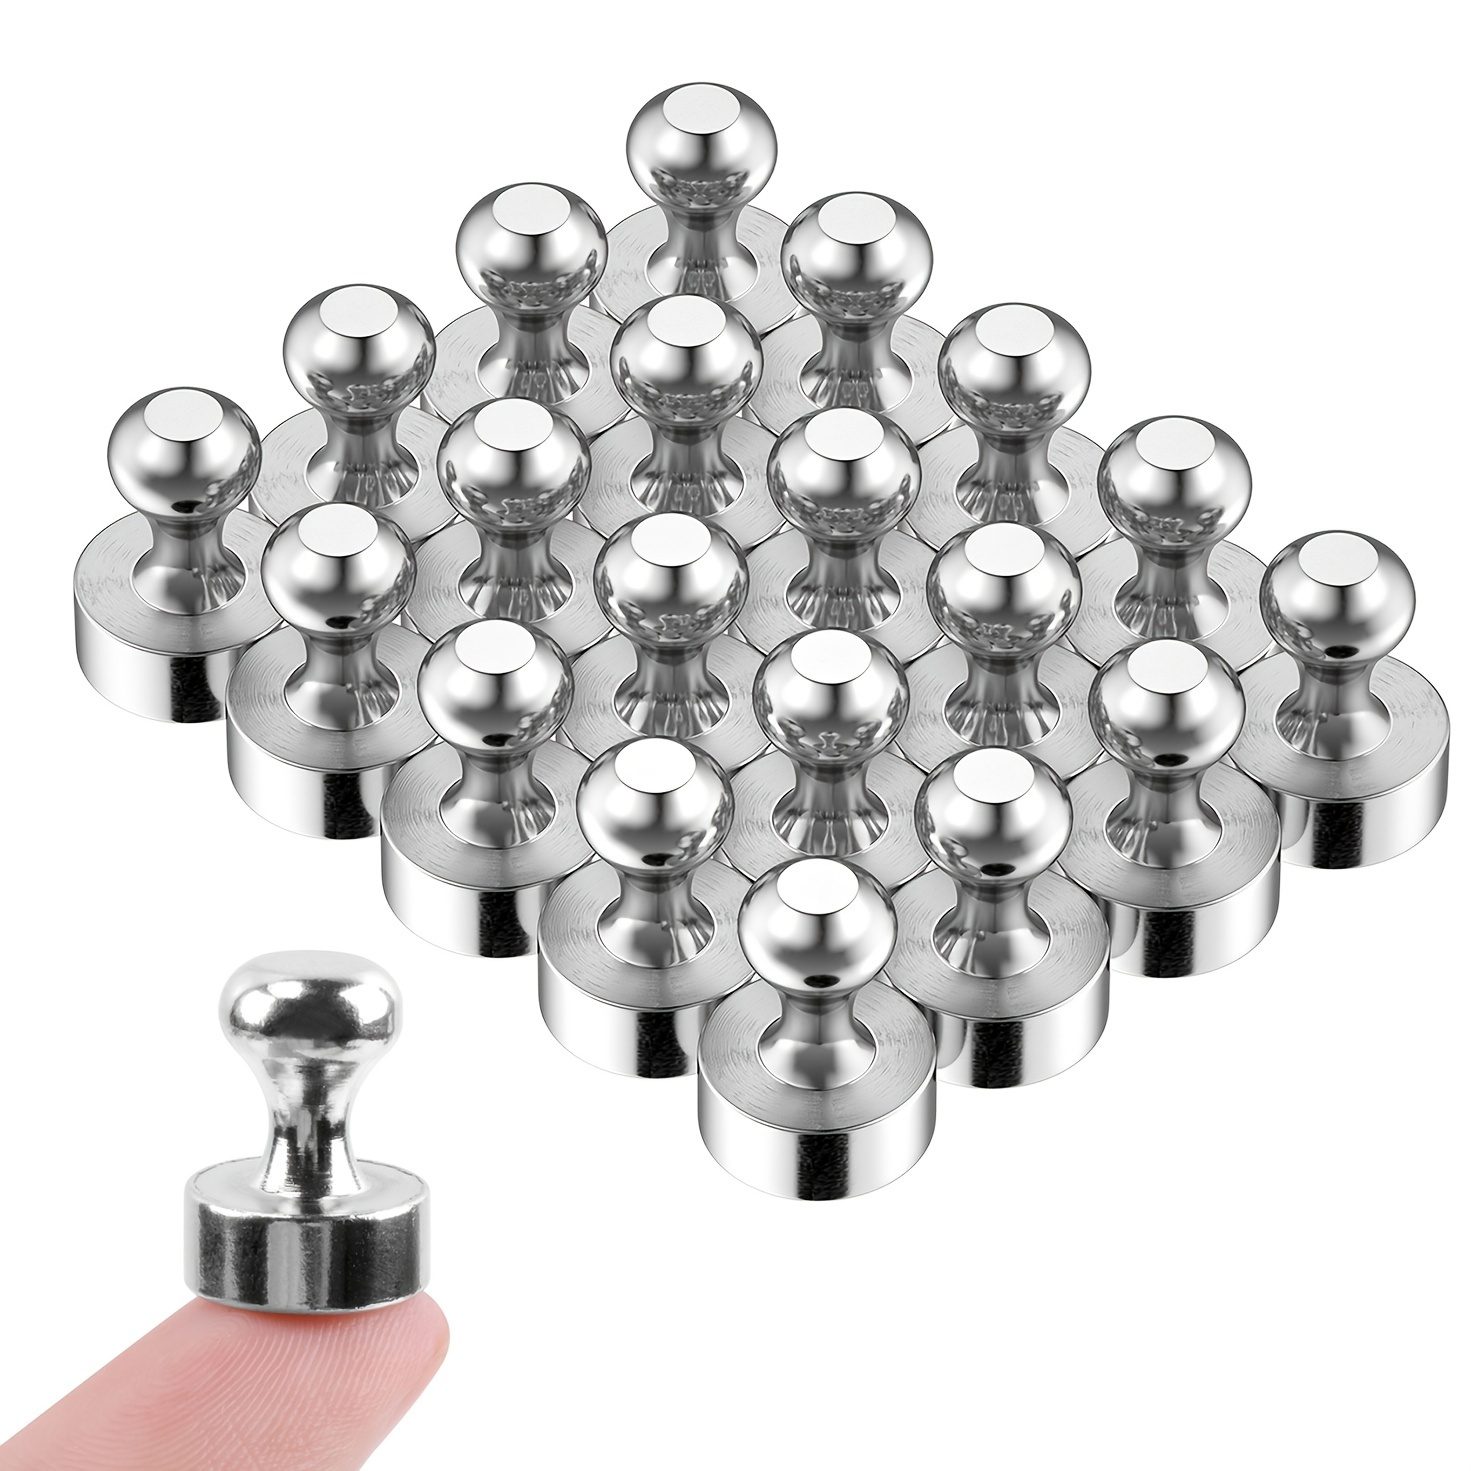 30pcs/set Small Round Neodymium Magnet, Strong Rare Earth Magnet For  Refrigerator, Office, Whiteboard (silver)